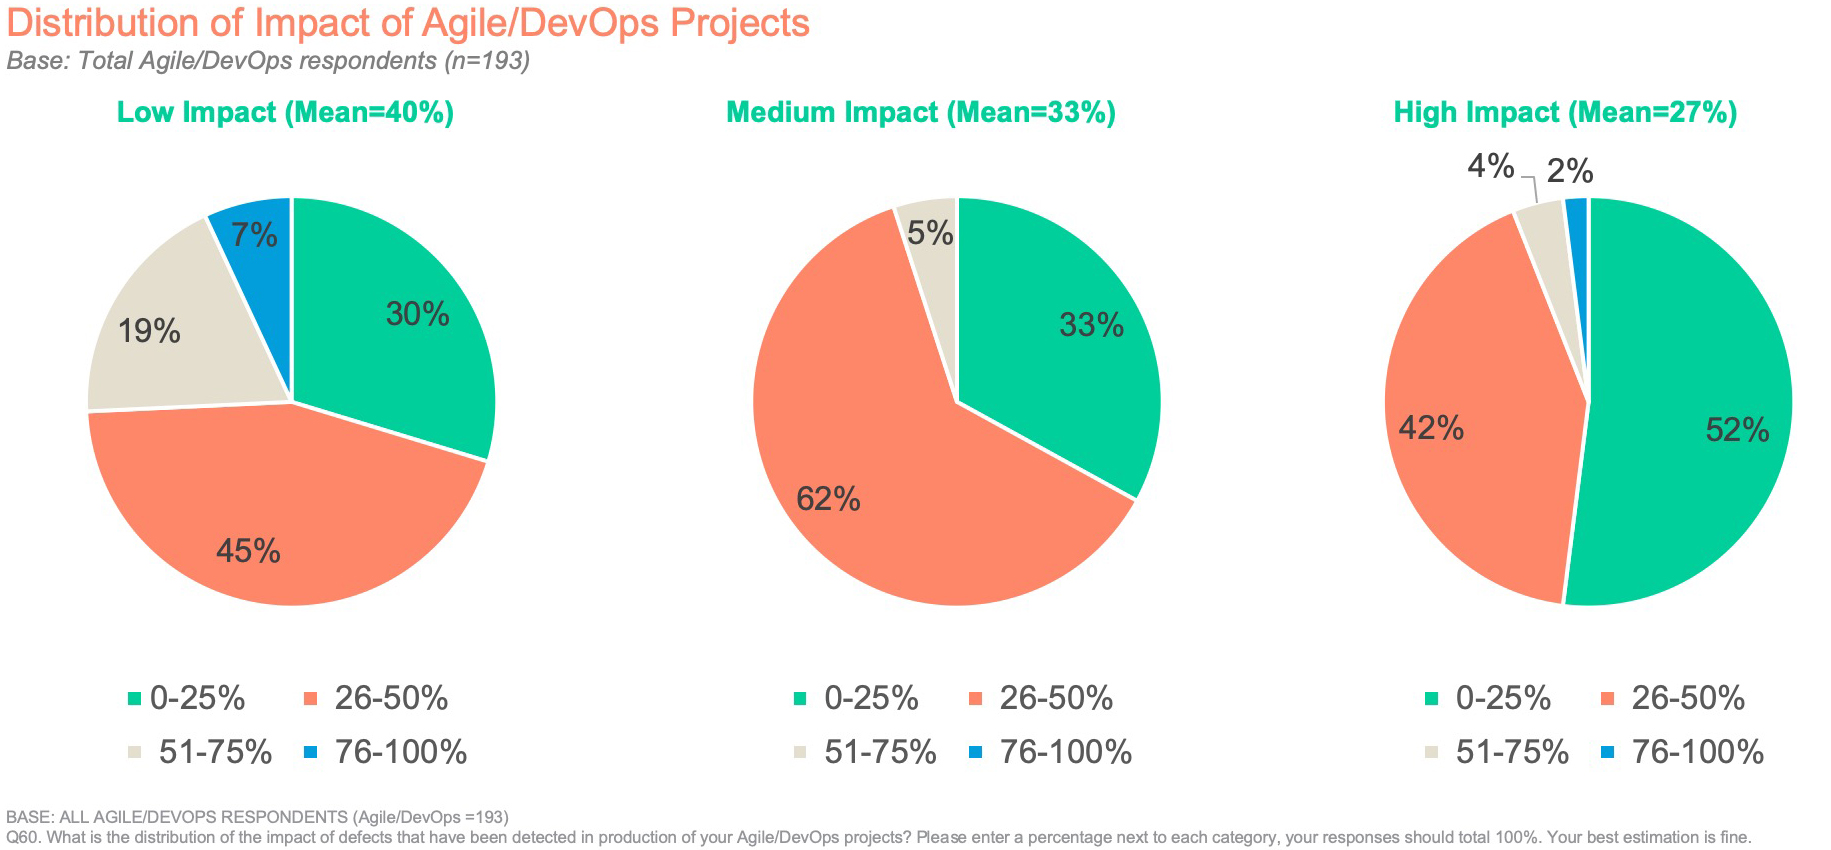 Distribution of Impact of Agile/DevOps Projects